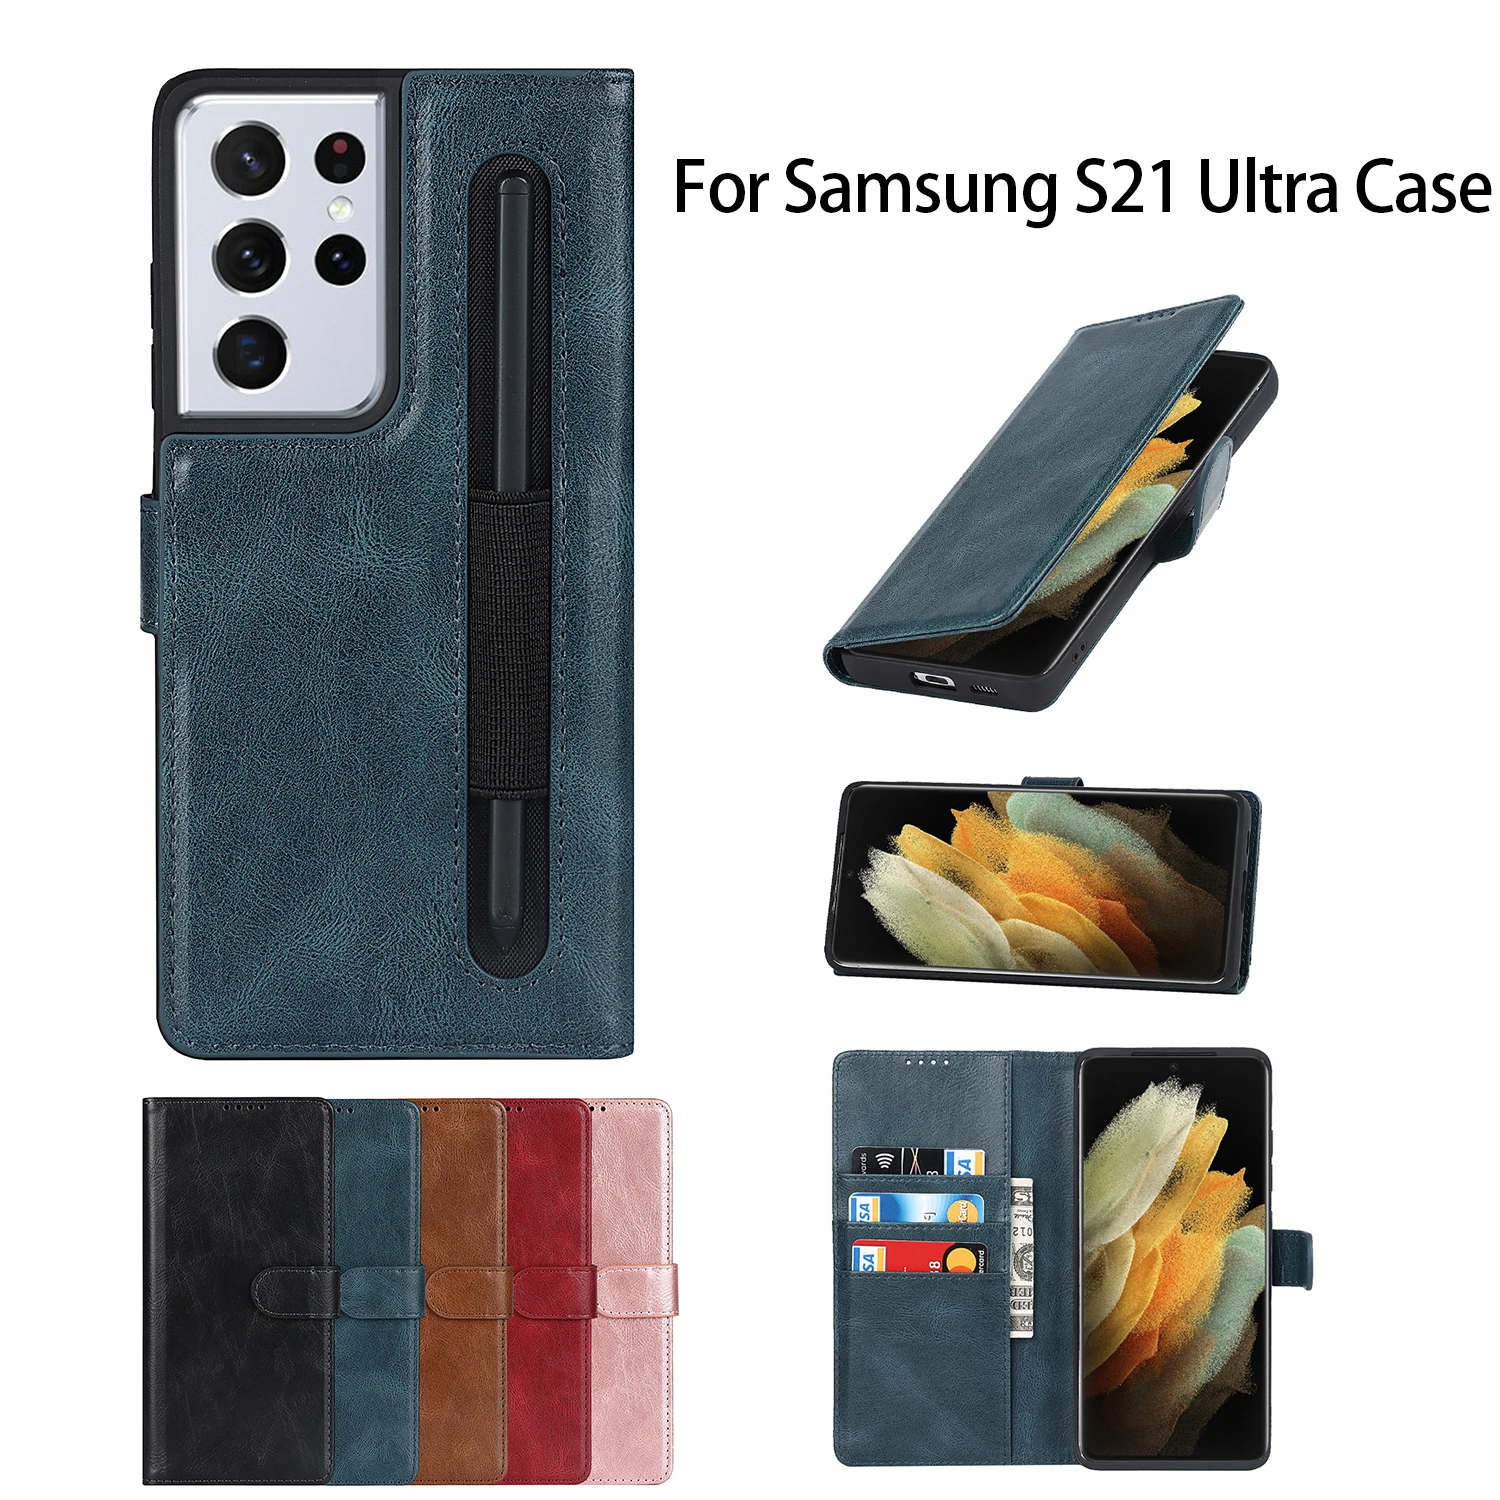 For Samsung S21 Ultra Case Galaxy S21Ultra 5G Cat Eye with S-pen Slot Leather Cover